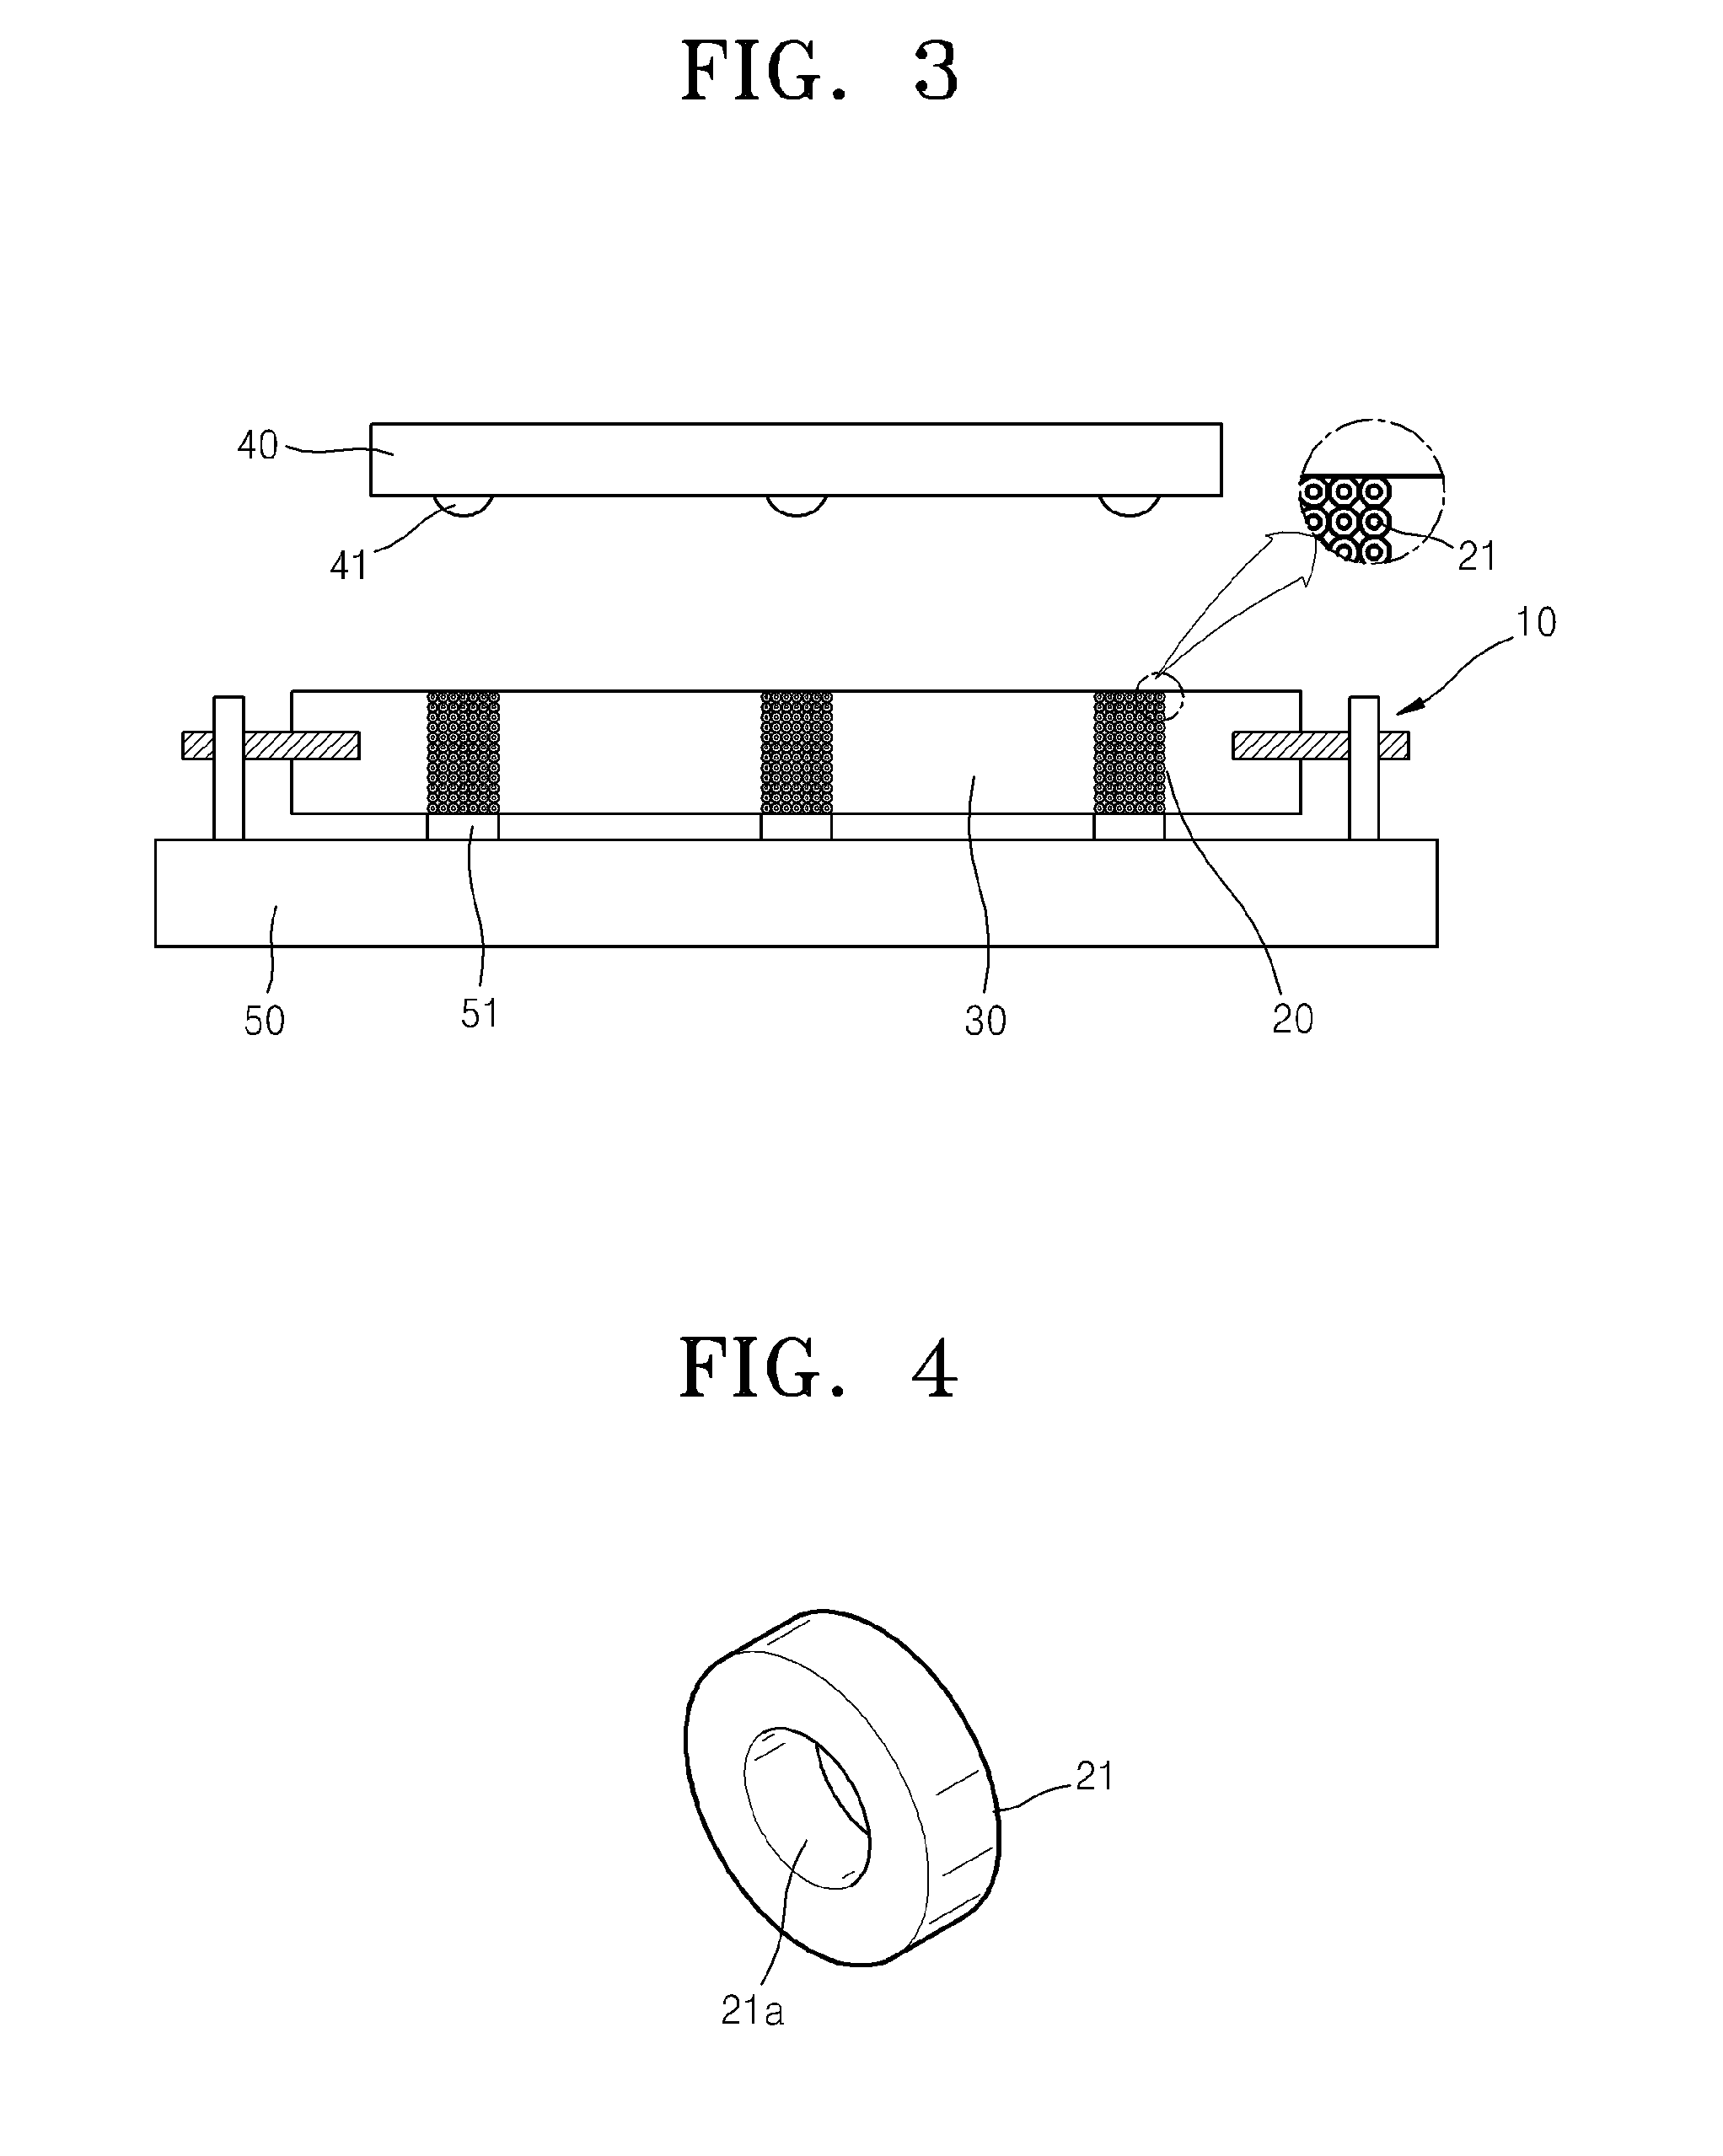 Test socket including conductive particles in which through-holes are formed and method for manufacturing same